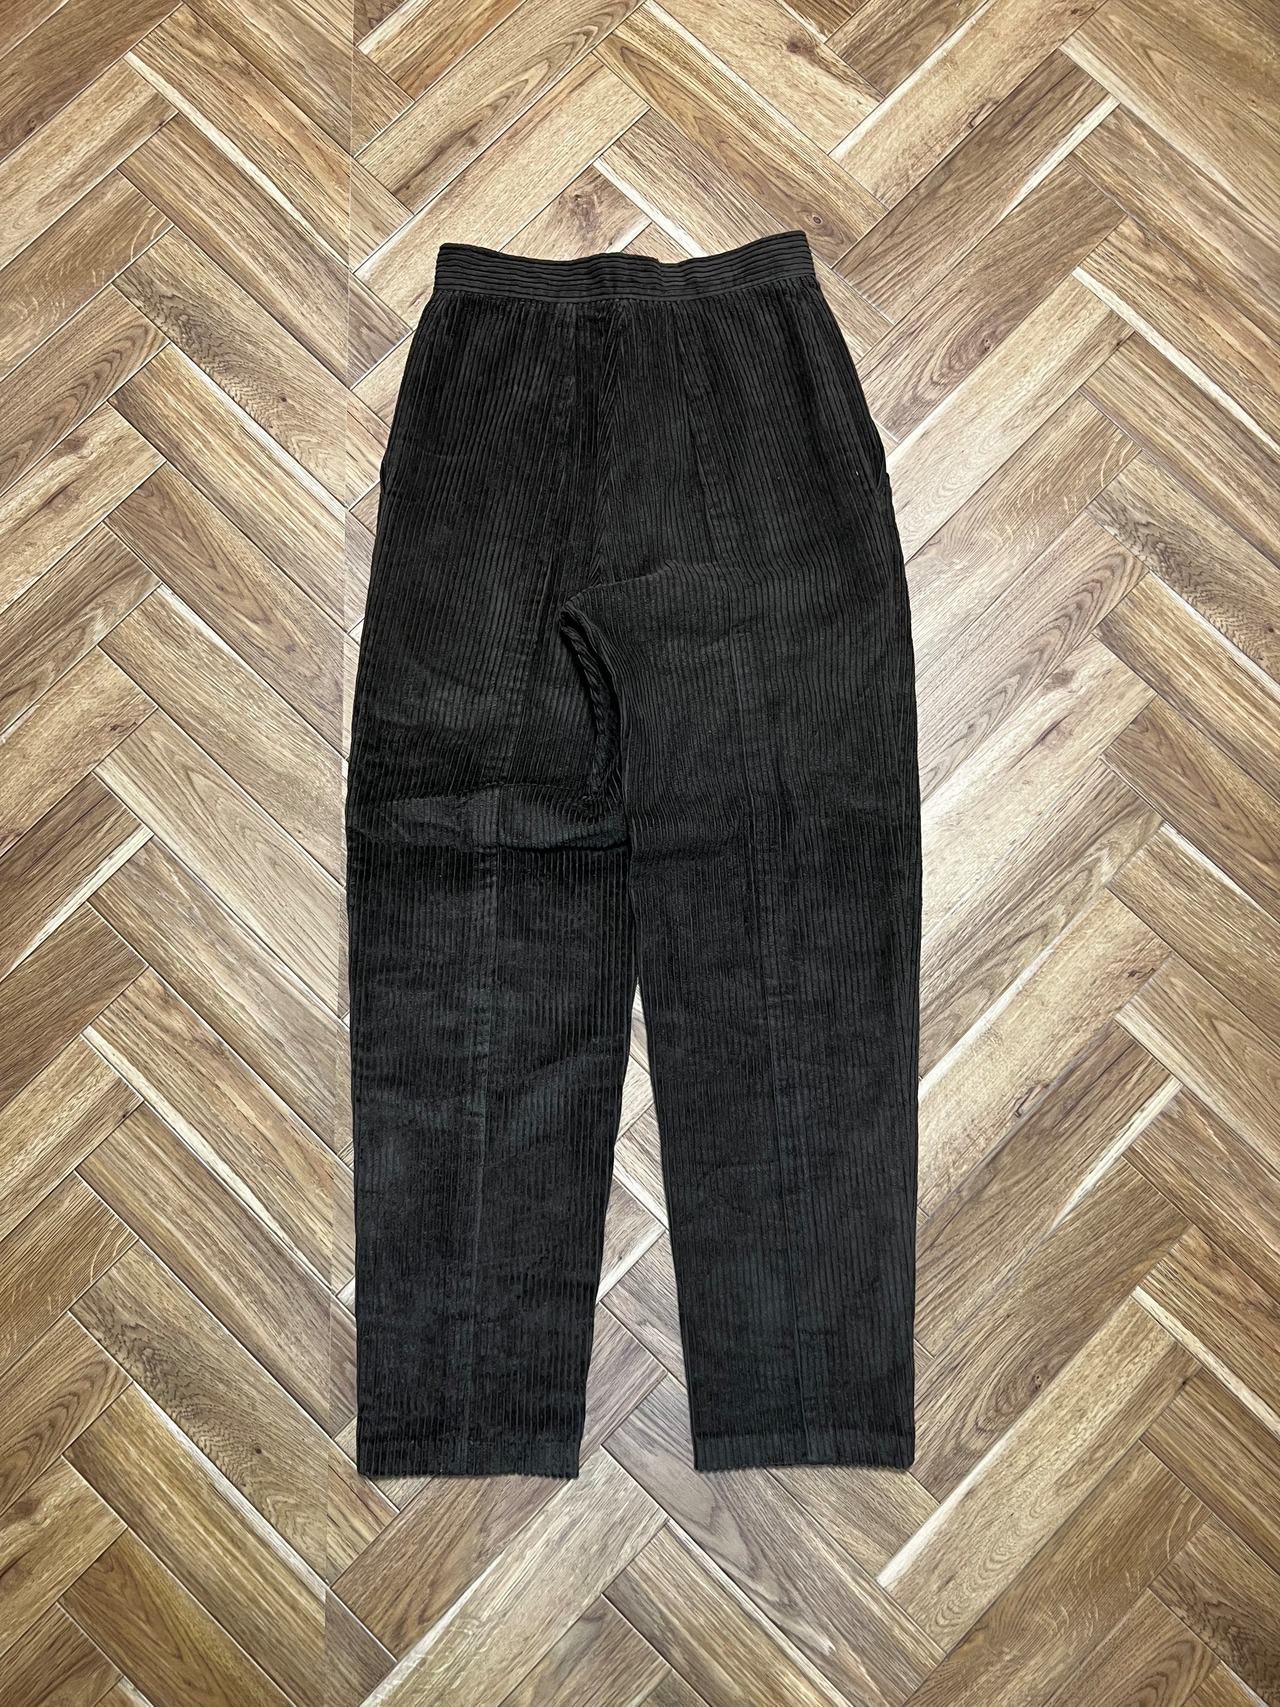 1990s- Europe Germany? Corduroy Trousers